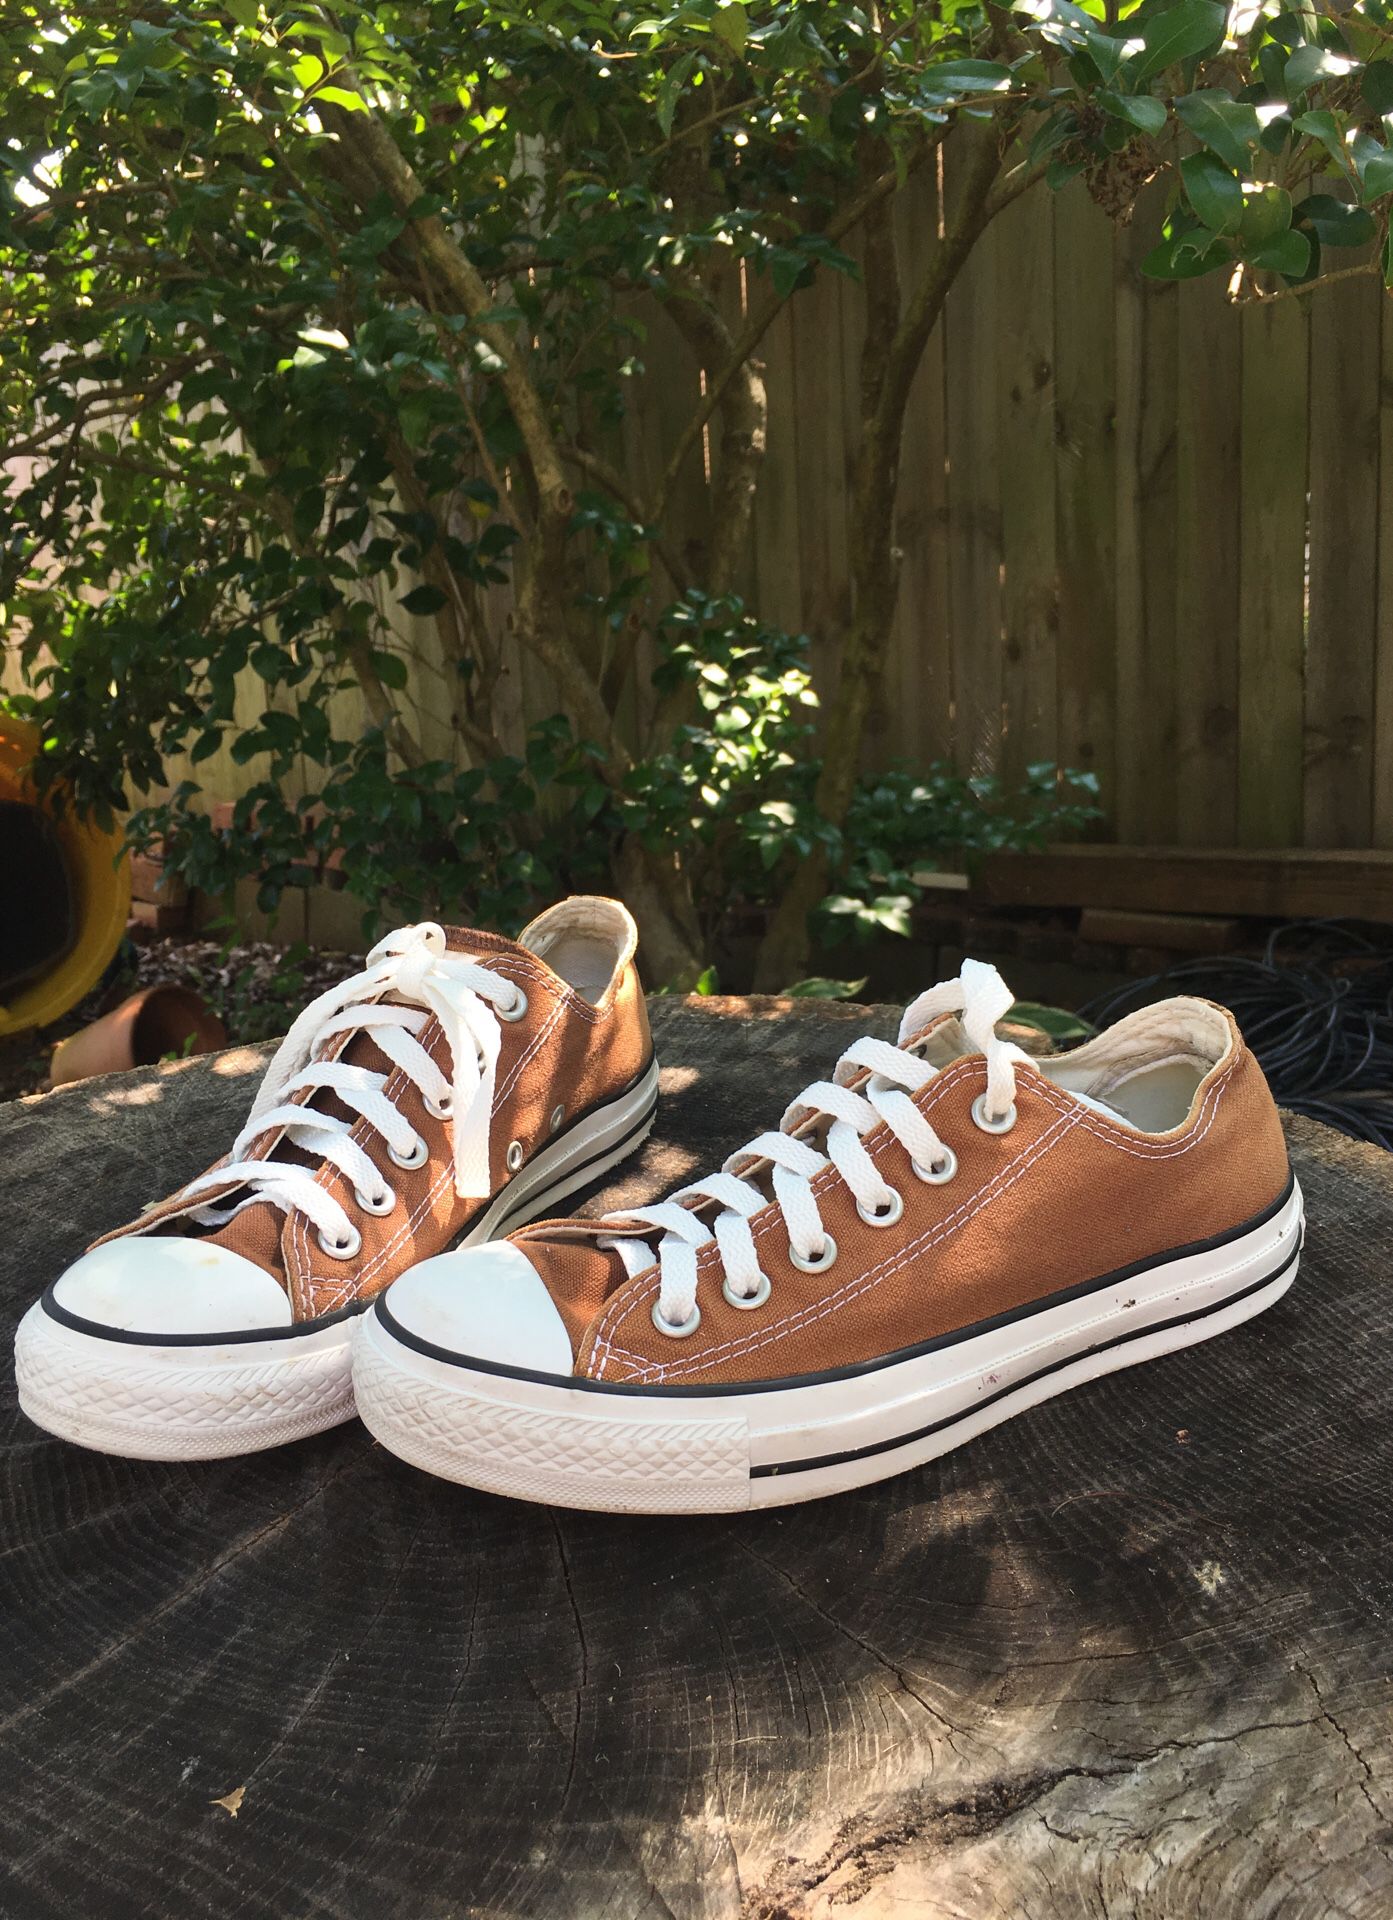 Brown low top converse all stars